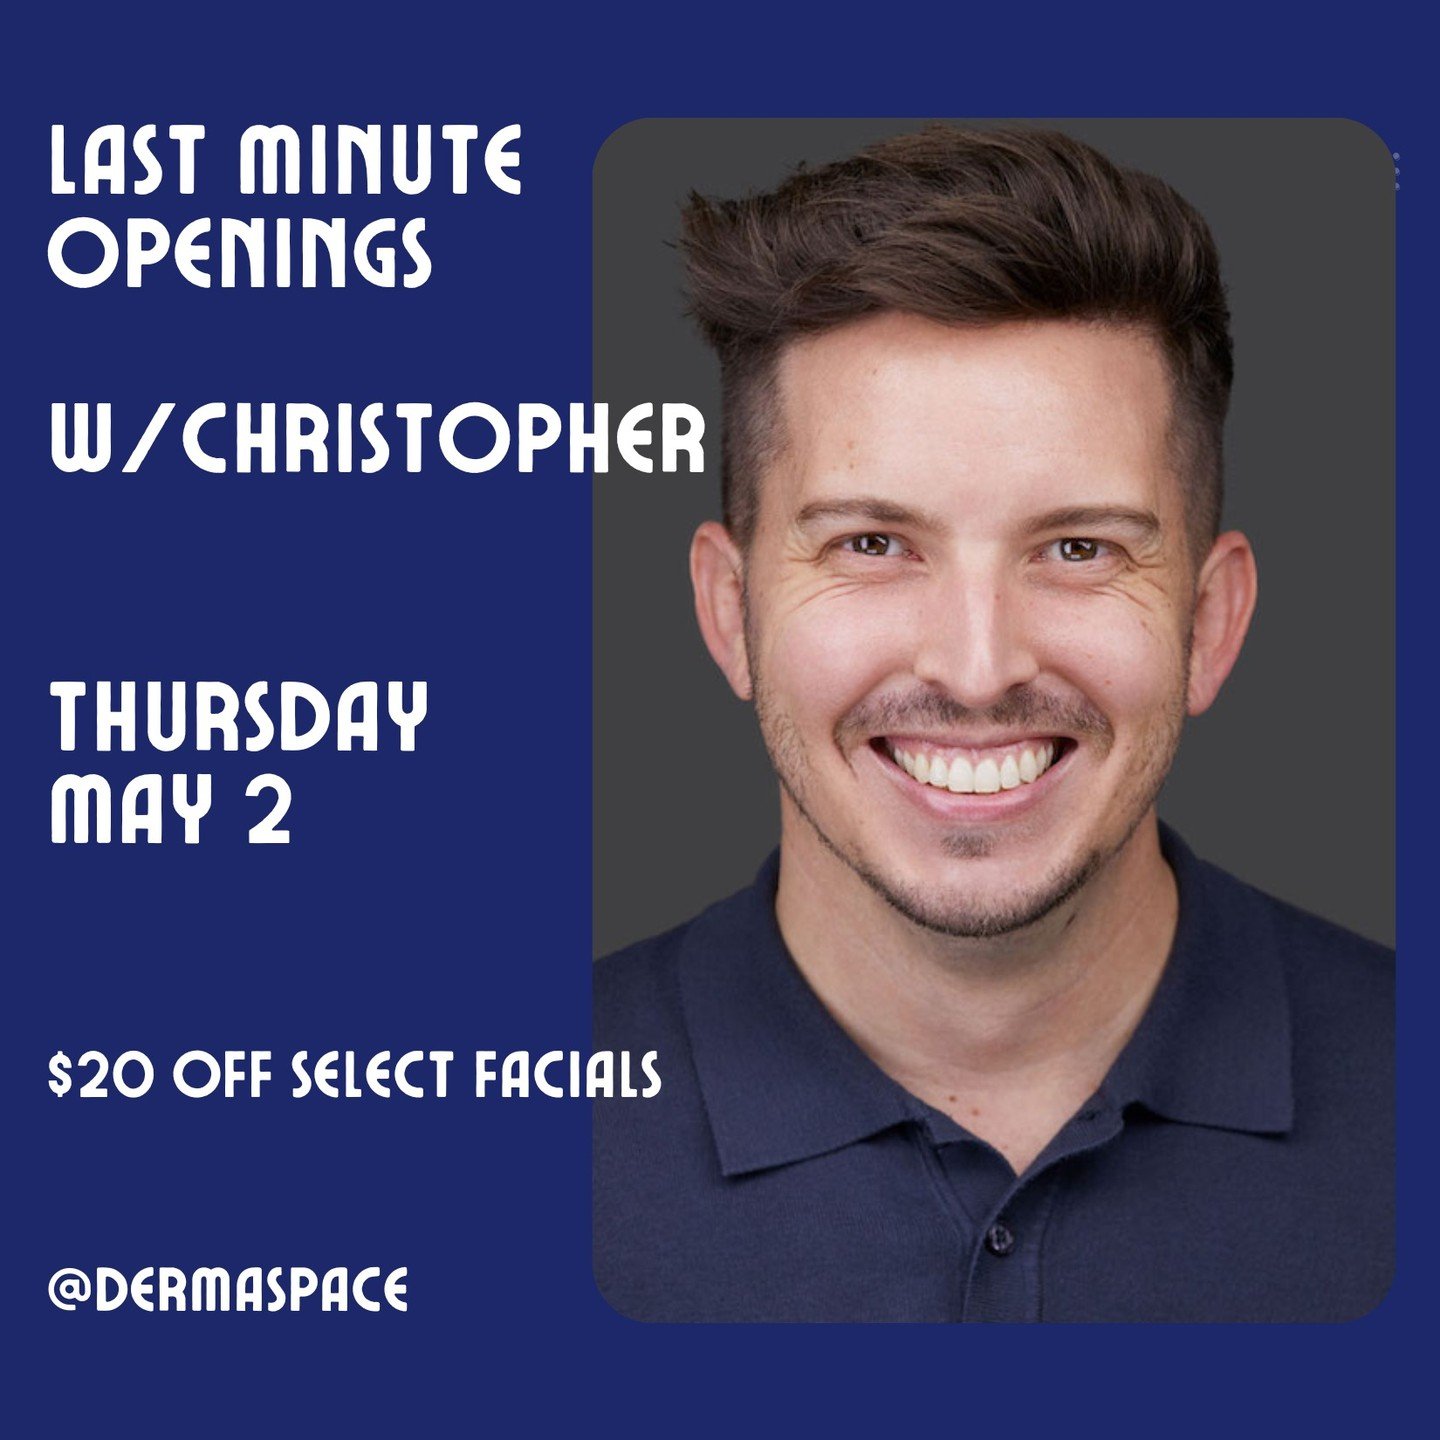 Last day to save $20 on our most popular skincare services with Christopher. Book via the link in the profile or by visiting DERMASPACE.COM ❤️

#skincare&nbsp;#facial #facialextractions #acnefacial #antiaging #healthyaging #seattleesthetician&nbsp;#s